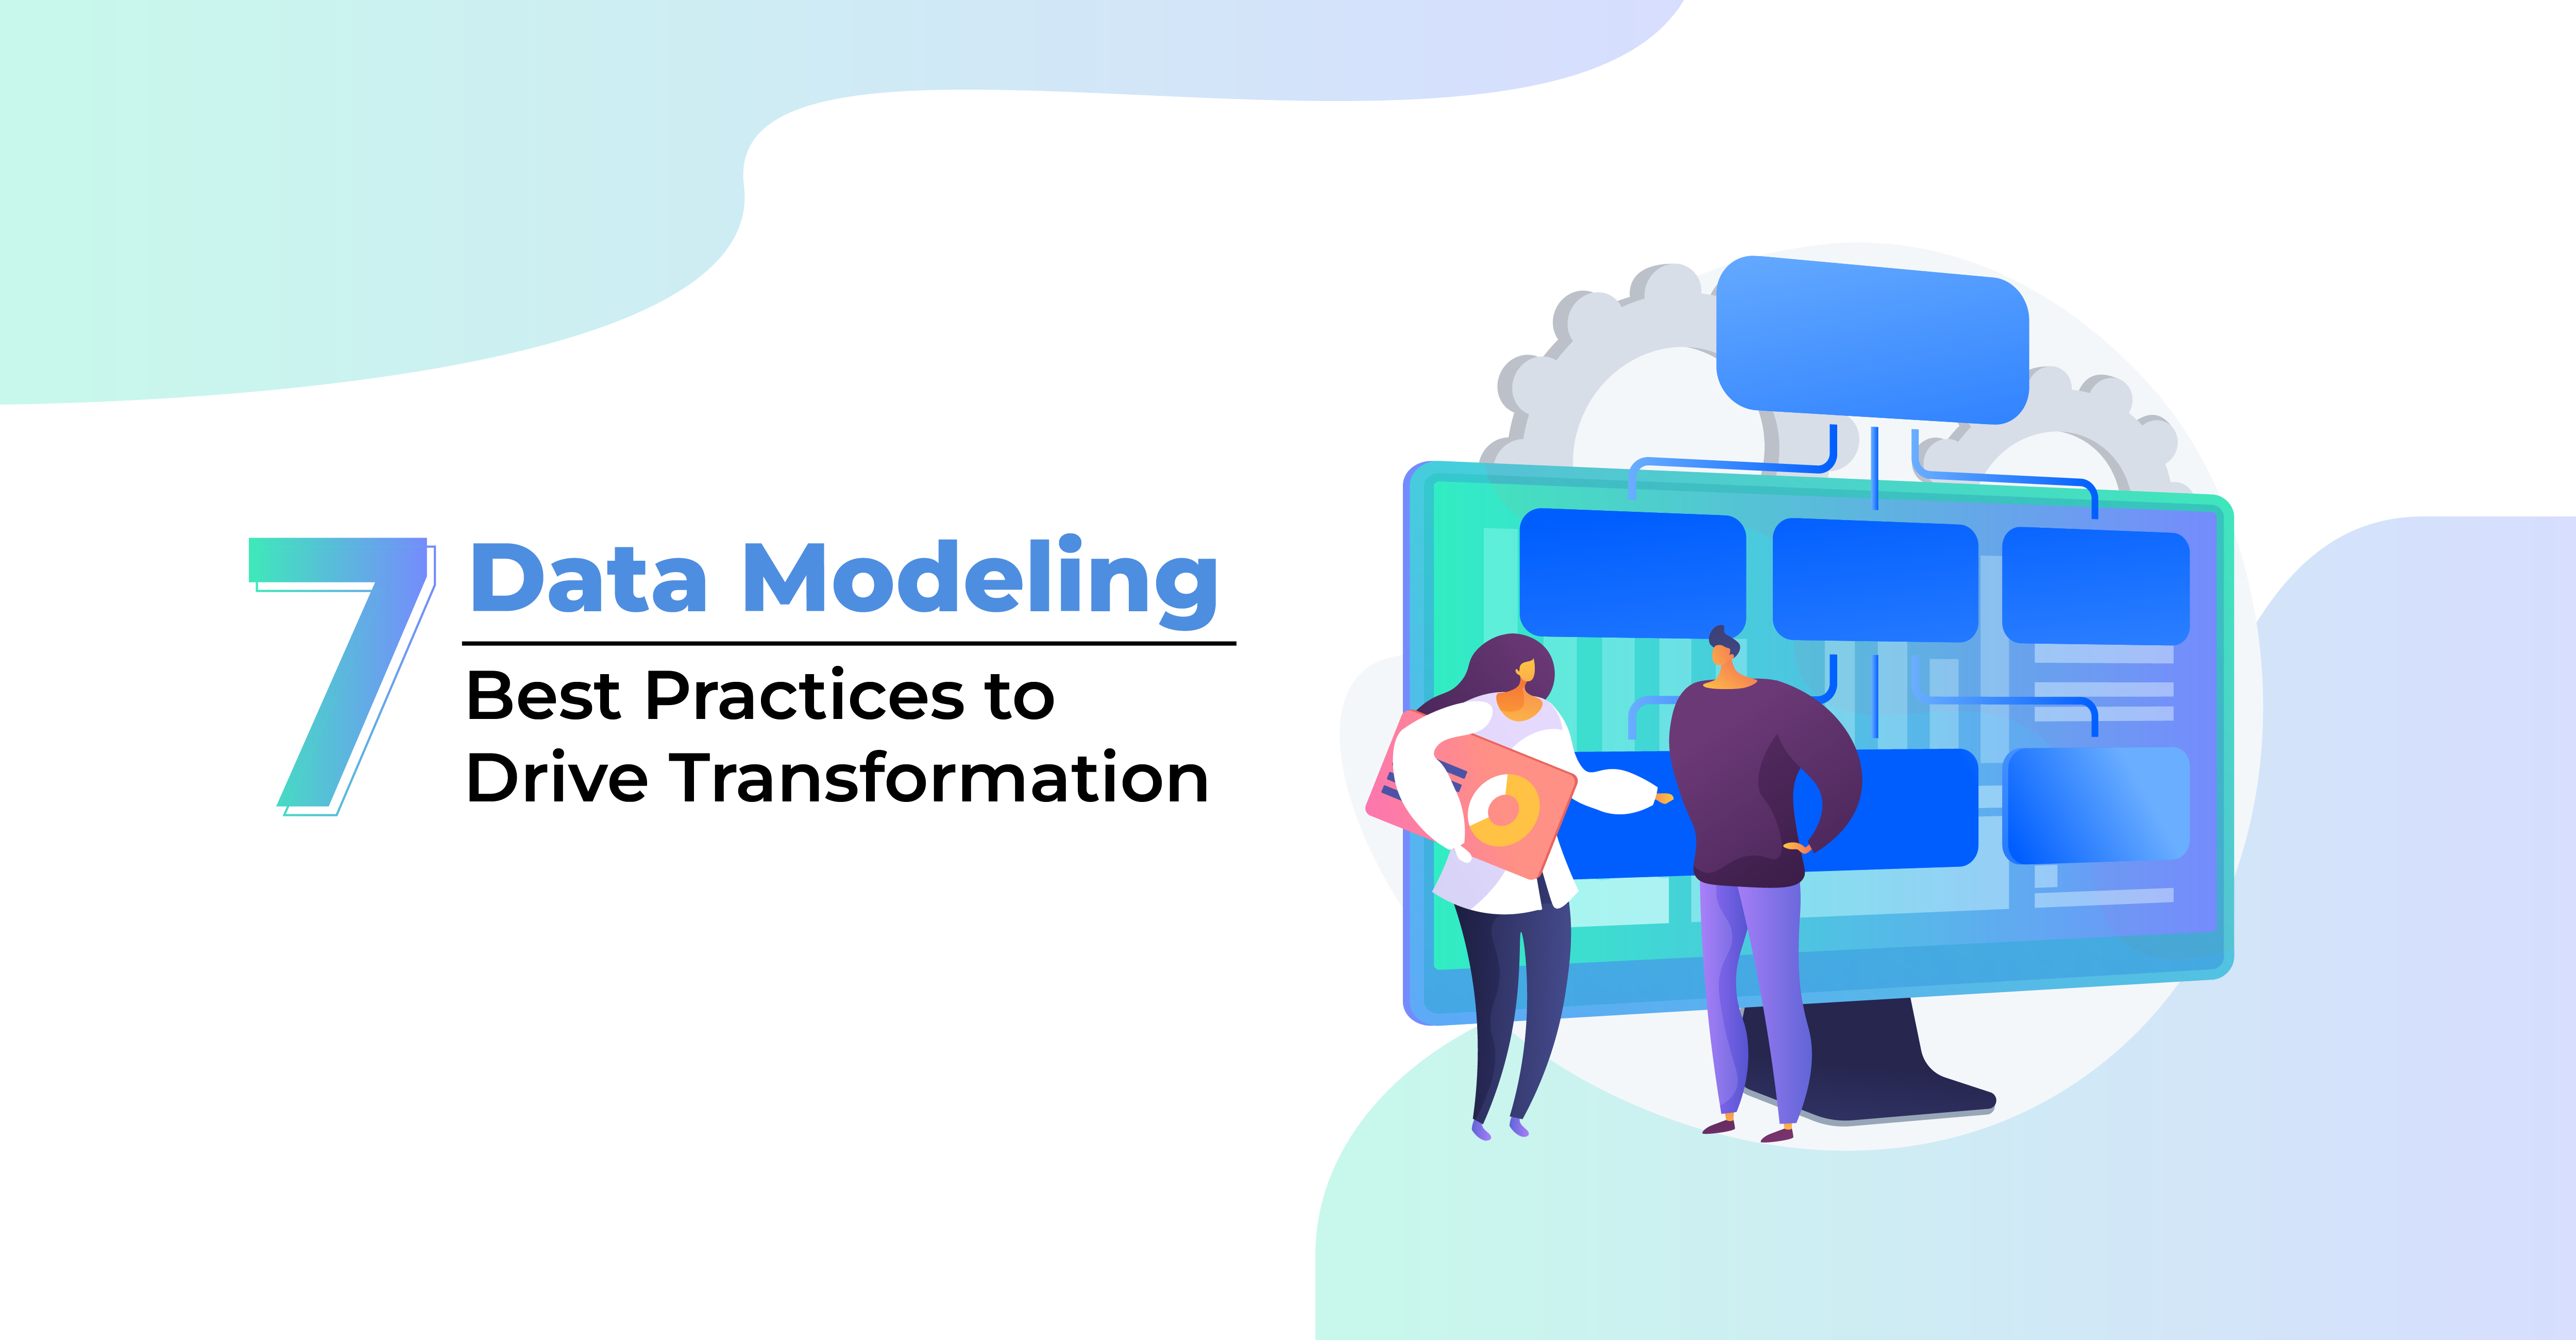 7 Data Modeling Best Practices to Drive Transformation